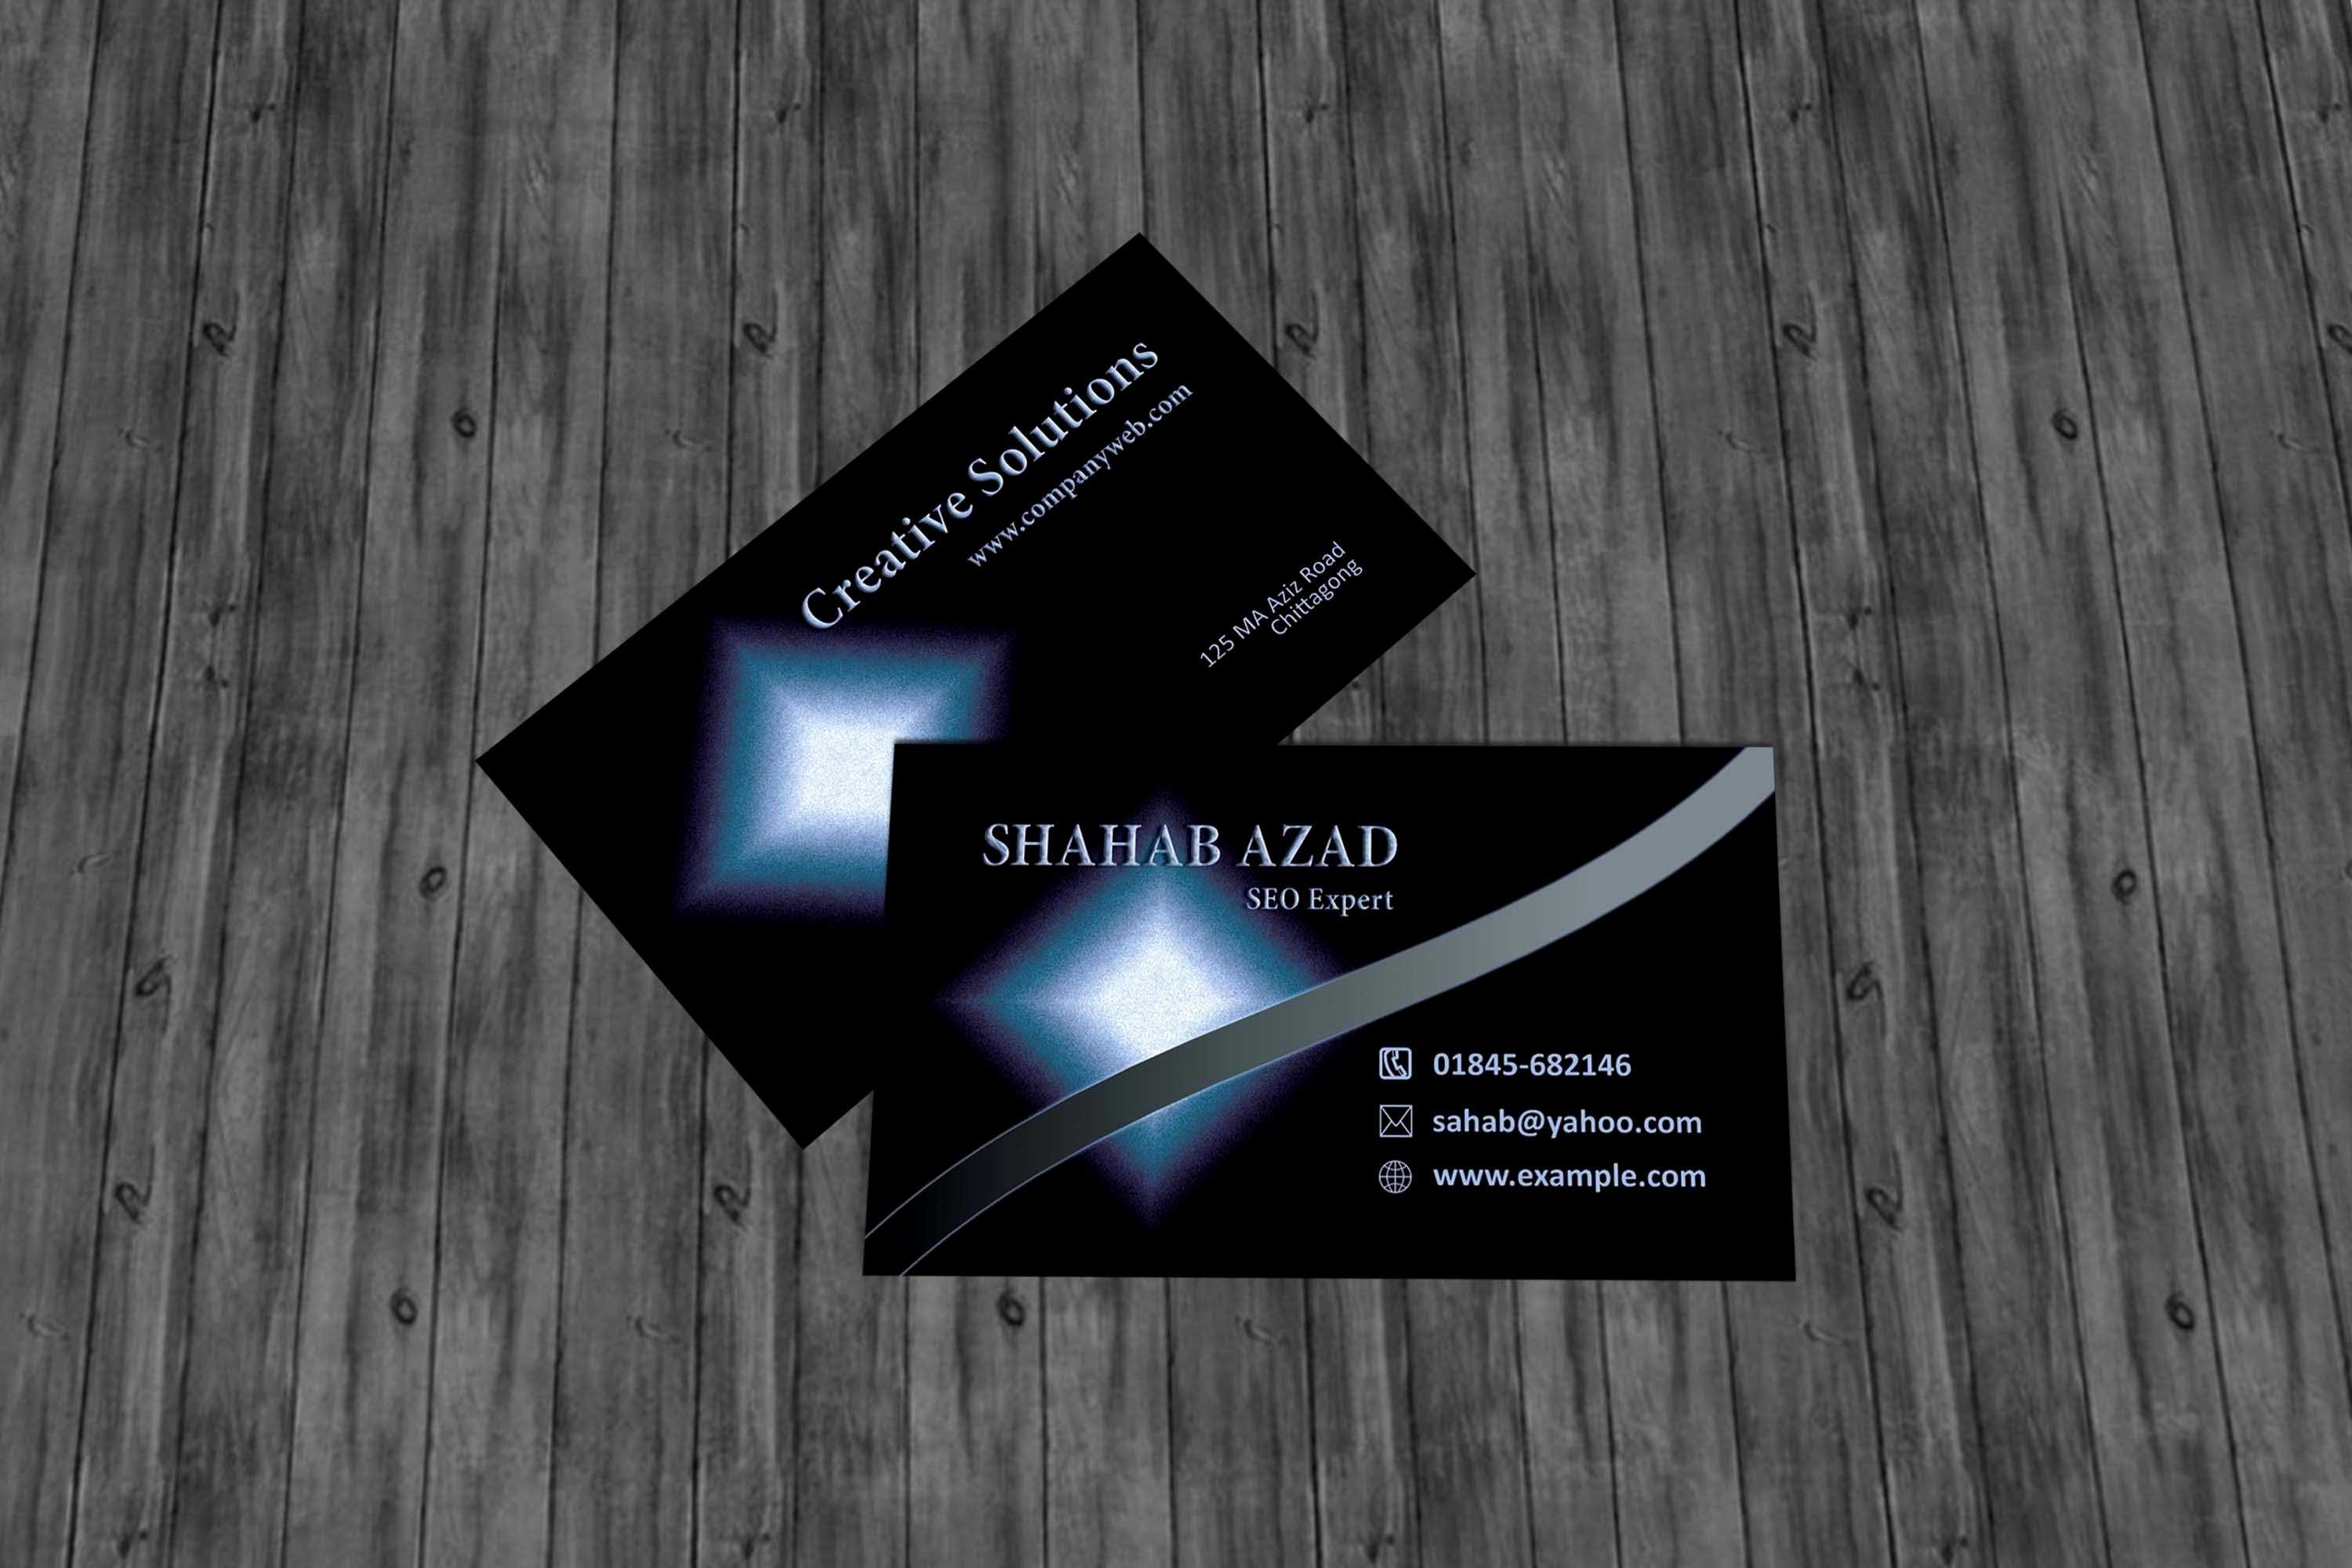 Photoshop Cs6 Business Card Template With Regard To Photoshop Cs6 Business Card Template